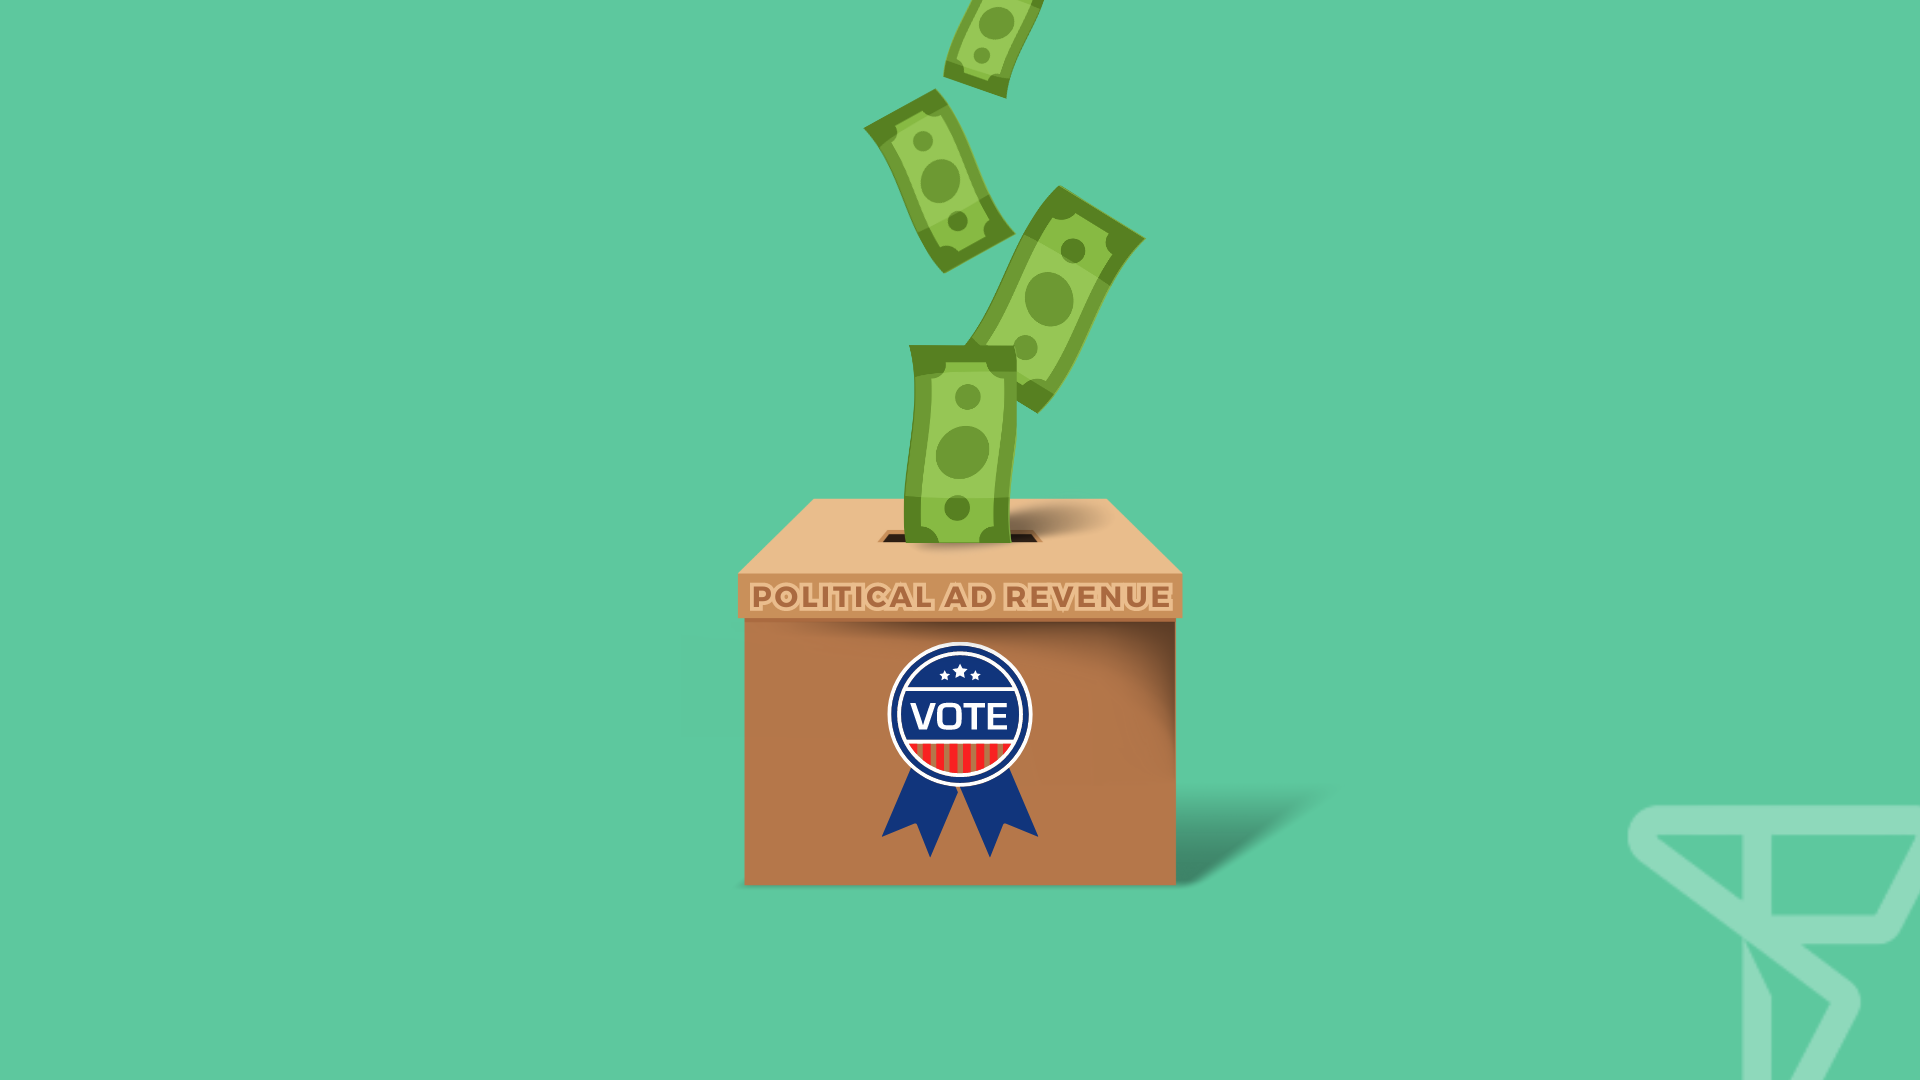 5 Ways Publishers Can Maximize Ad Revenue This Political Season